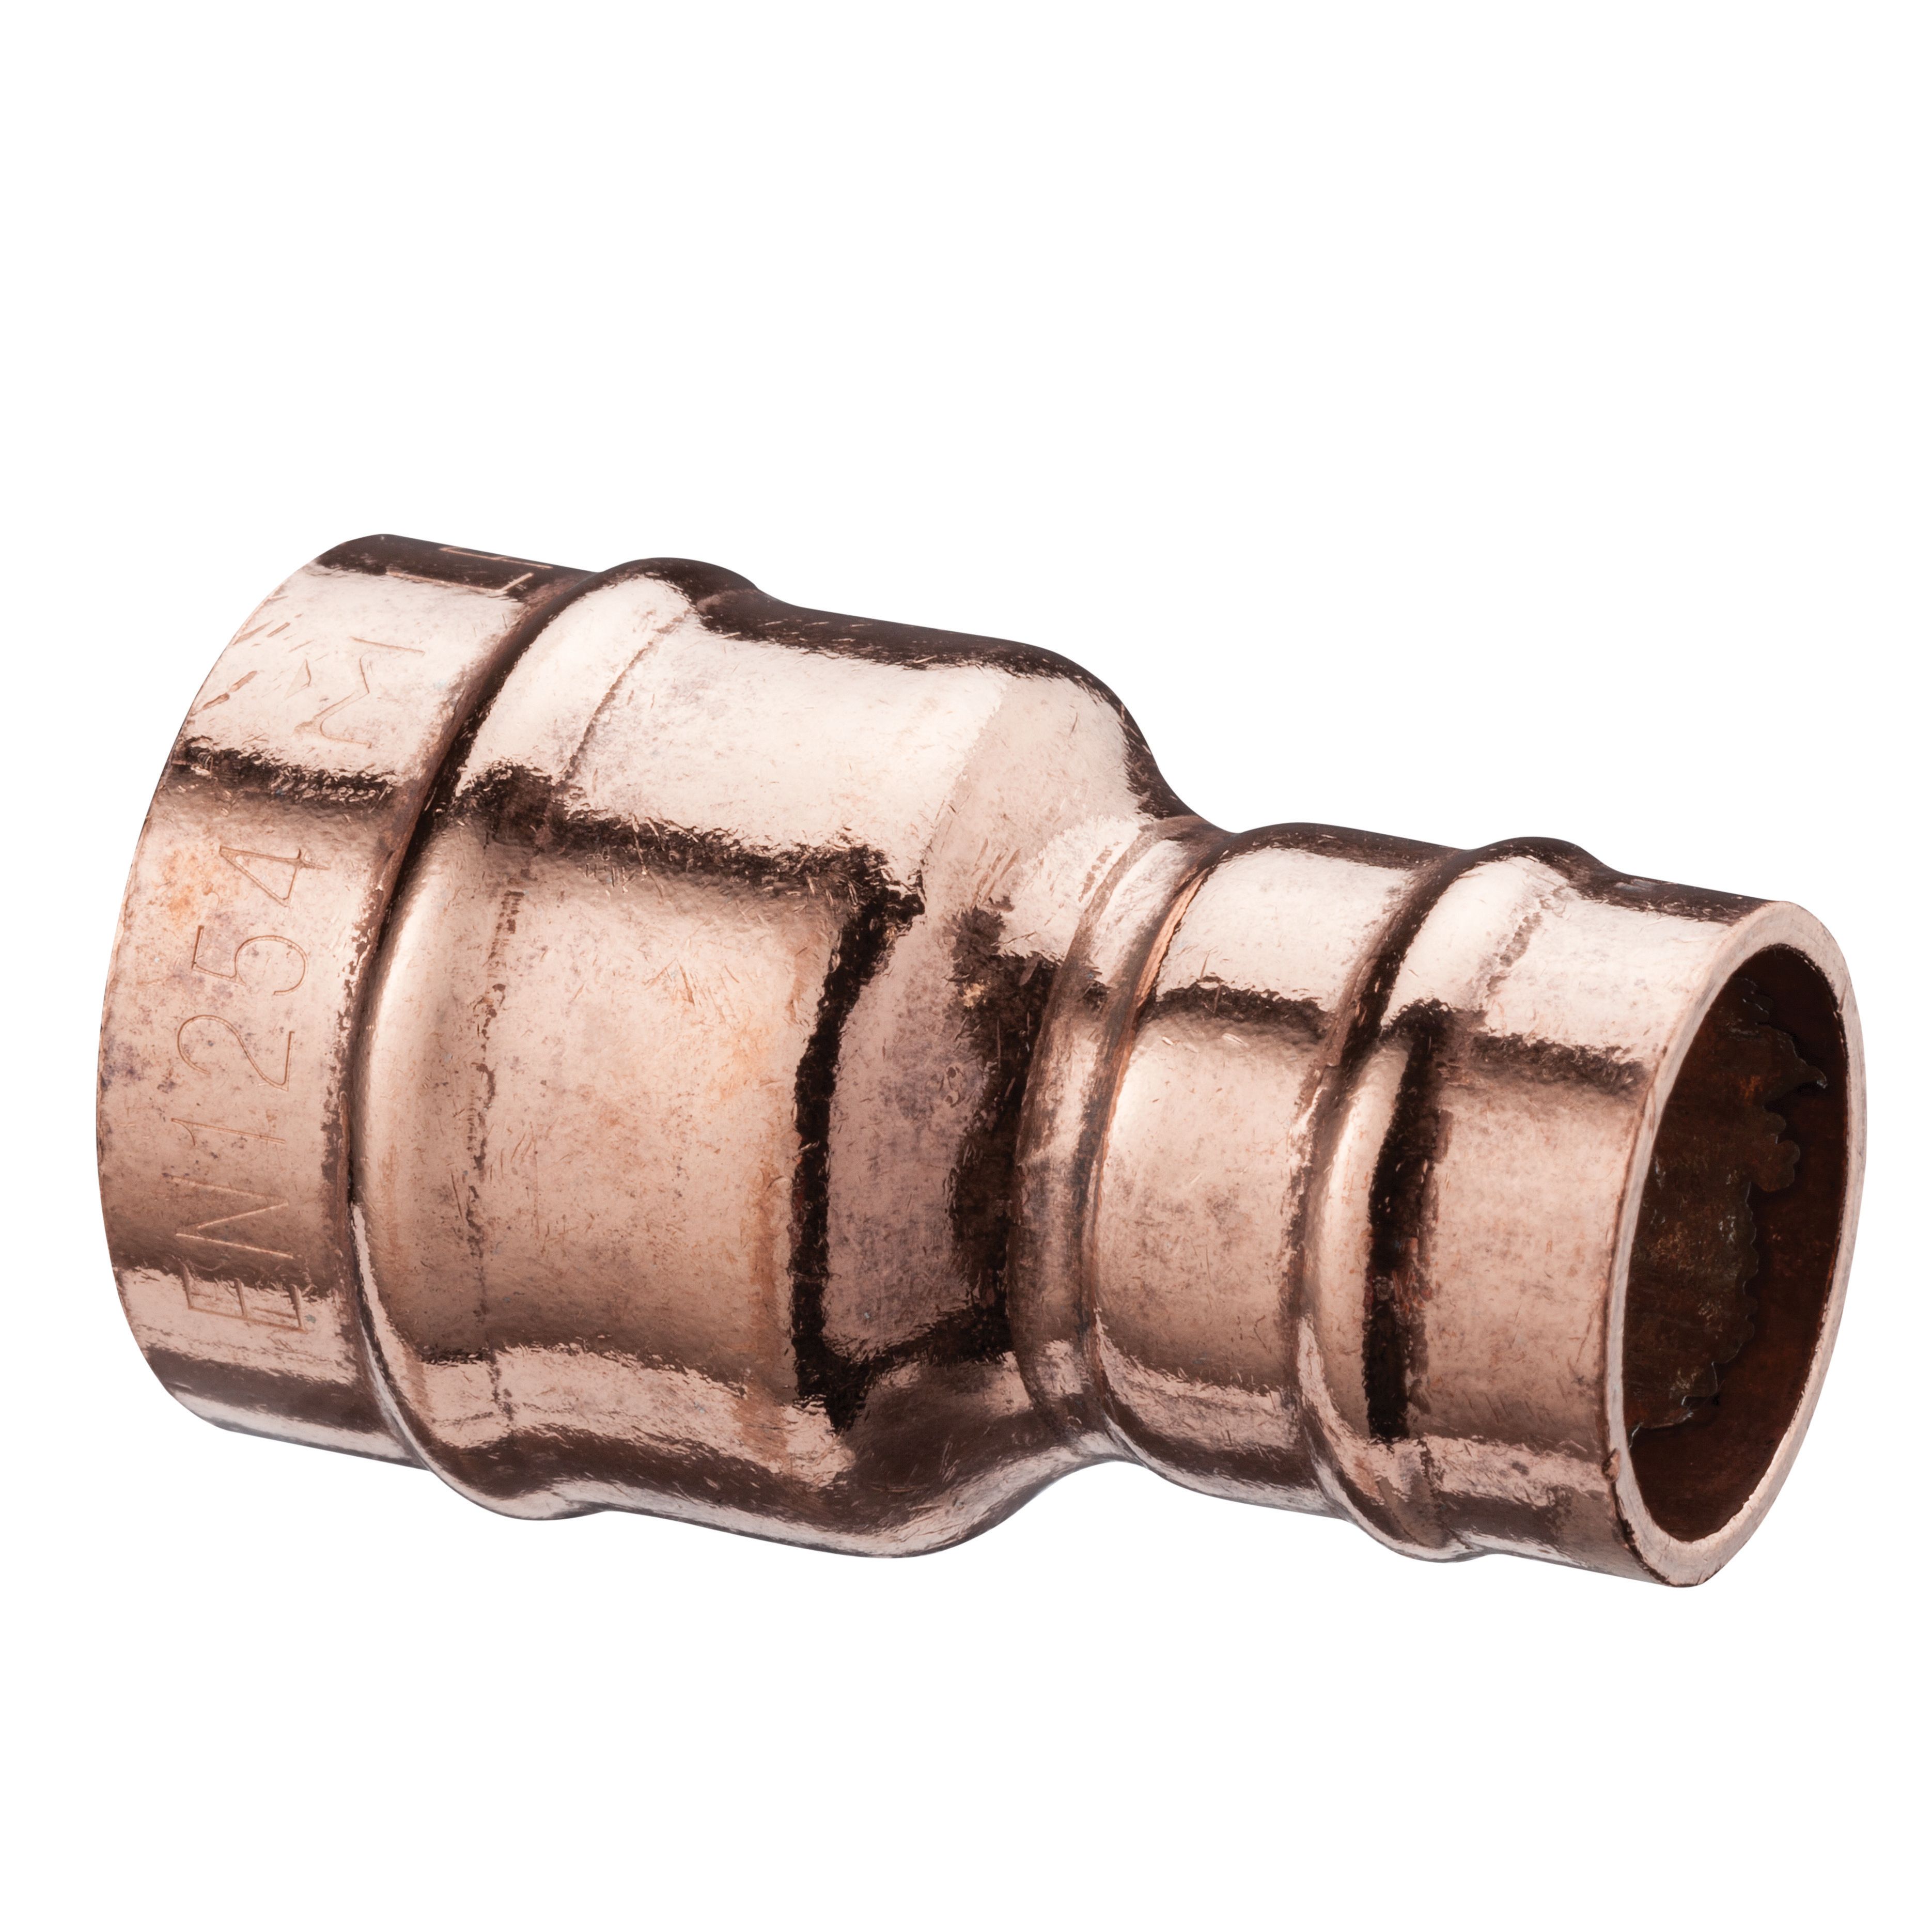 Image of Primaflow Copper Solder Ring Reduced Coupling - 22 X 28mm